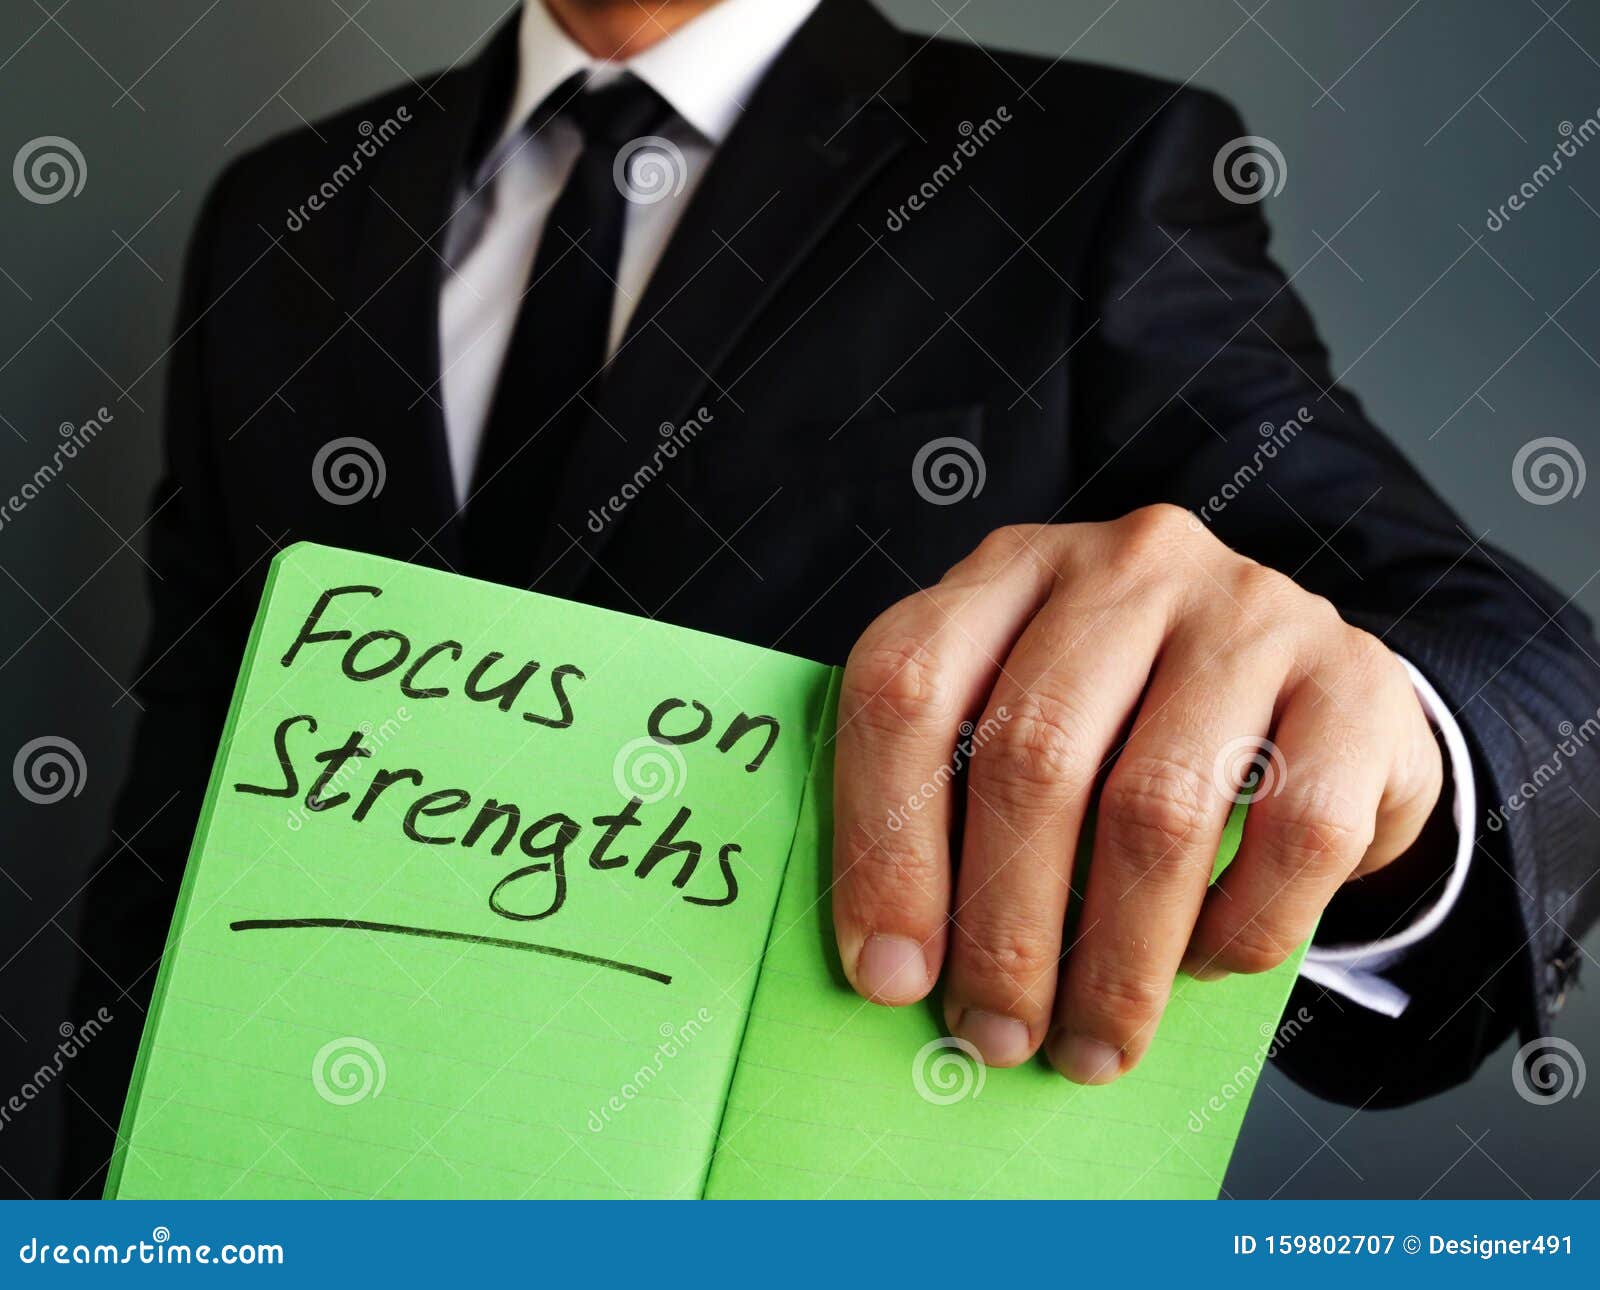 focus on strengths sign in the  notebook